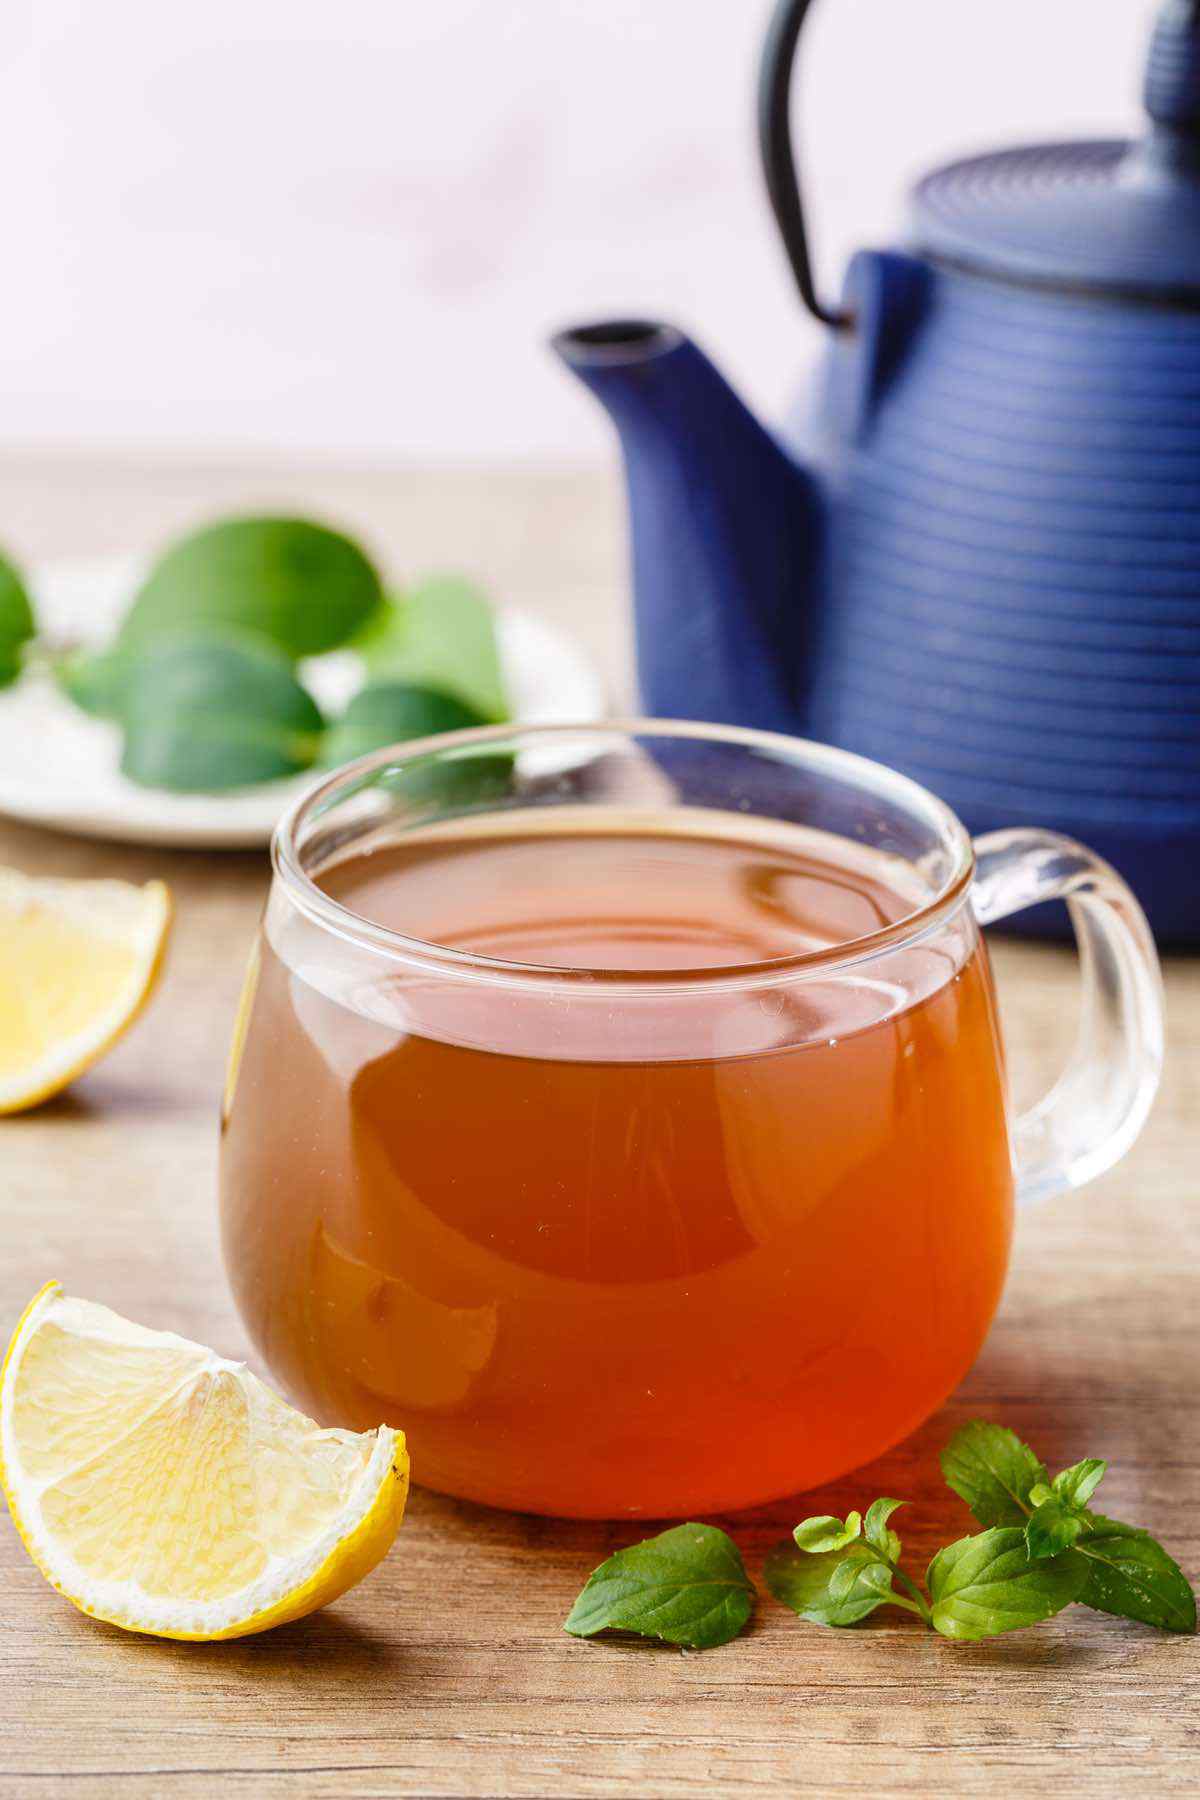 5 Metabolism Boosting Green Tea Drinks for Weight Loss